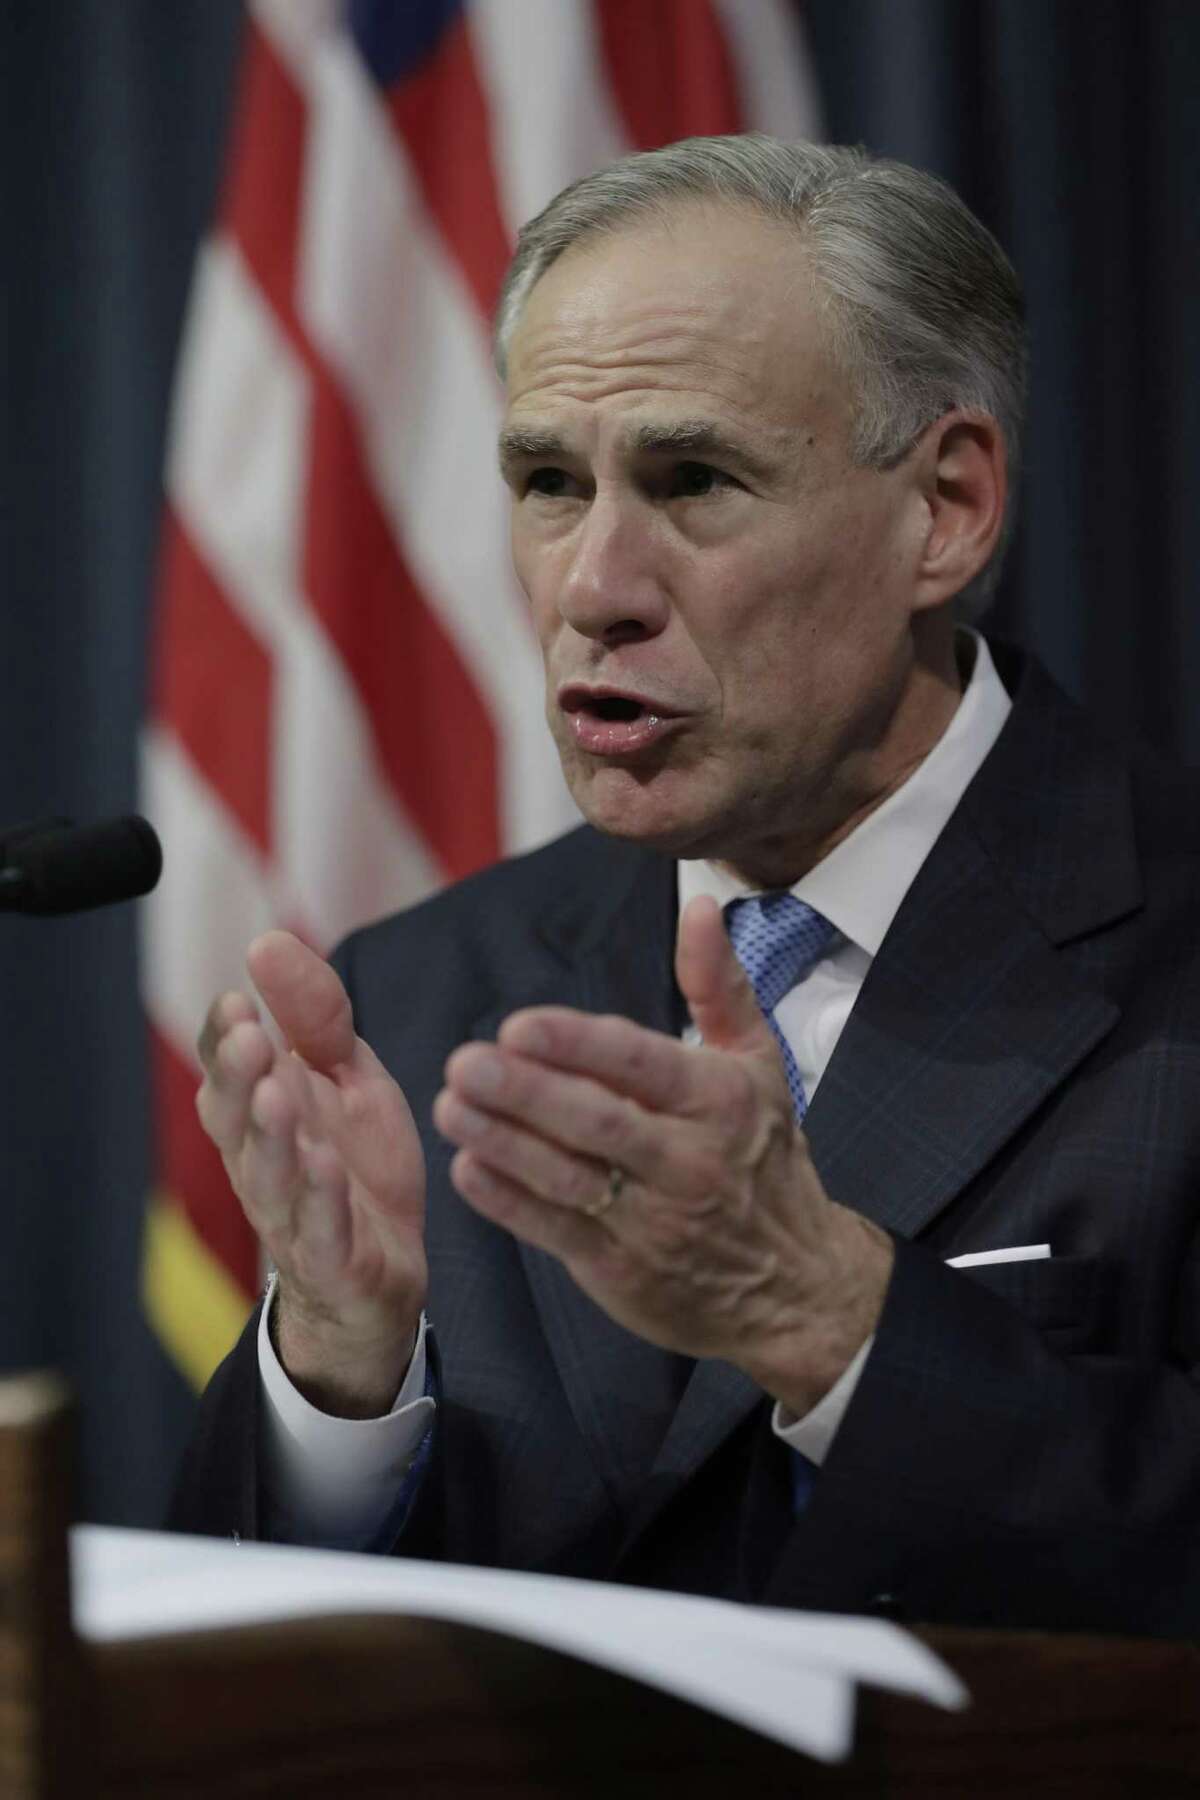 Texas Gov. Greg Abbott announces that there will be a special session of the Texas Legislature, Tuesday, June 6, 2017, in Austin, Texas. With the special session, beginning July 18th, Gov. Abbott is reviving a so-called "bathroom bill" targeting transgender people after the last try ended with Republican lawmakers angry and deadlocked. (AP Photo/Eric Gay)